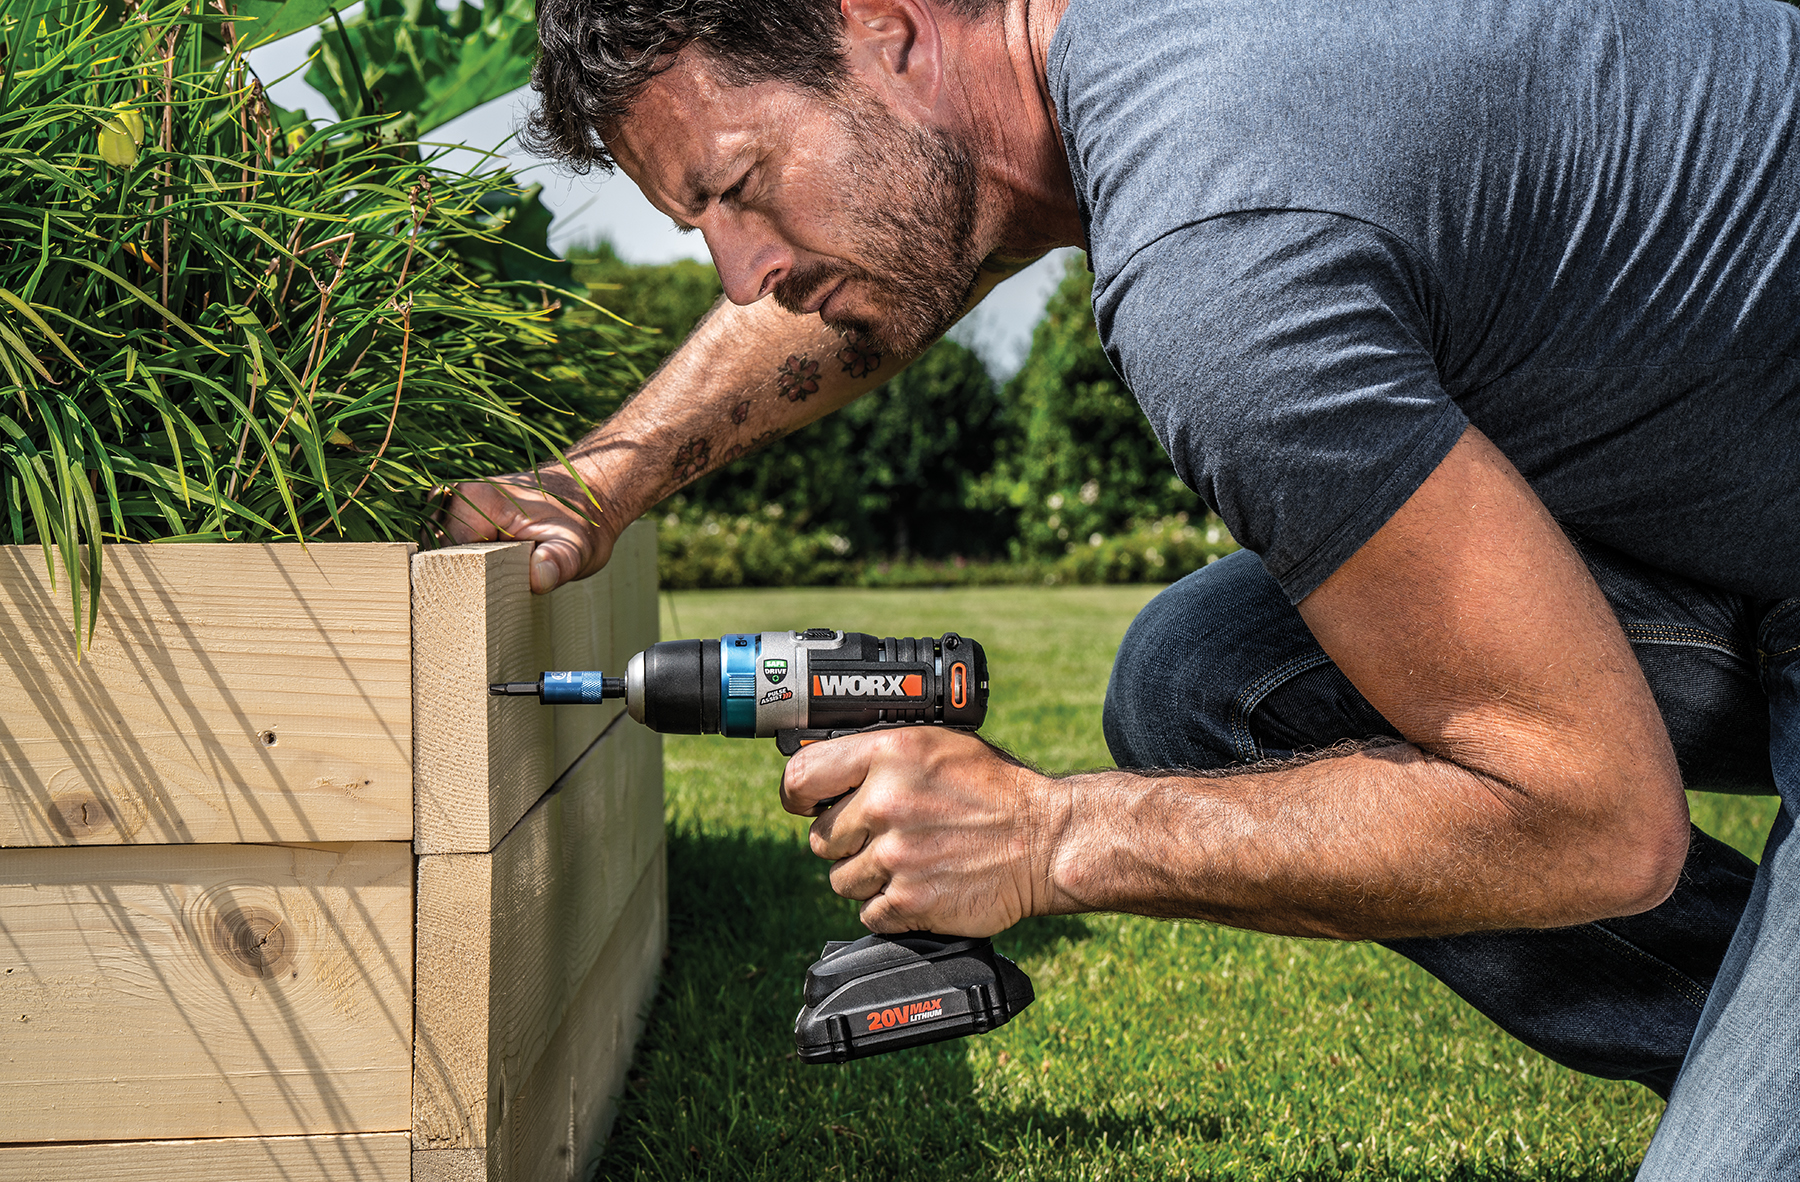 Use WORX Ai Drill to build raised bed